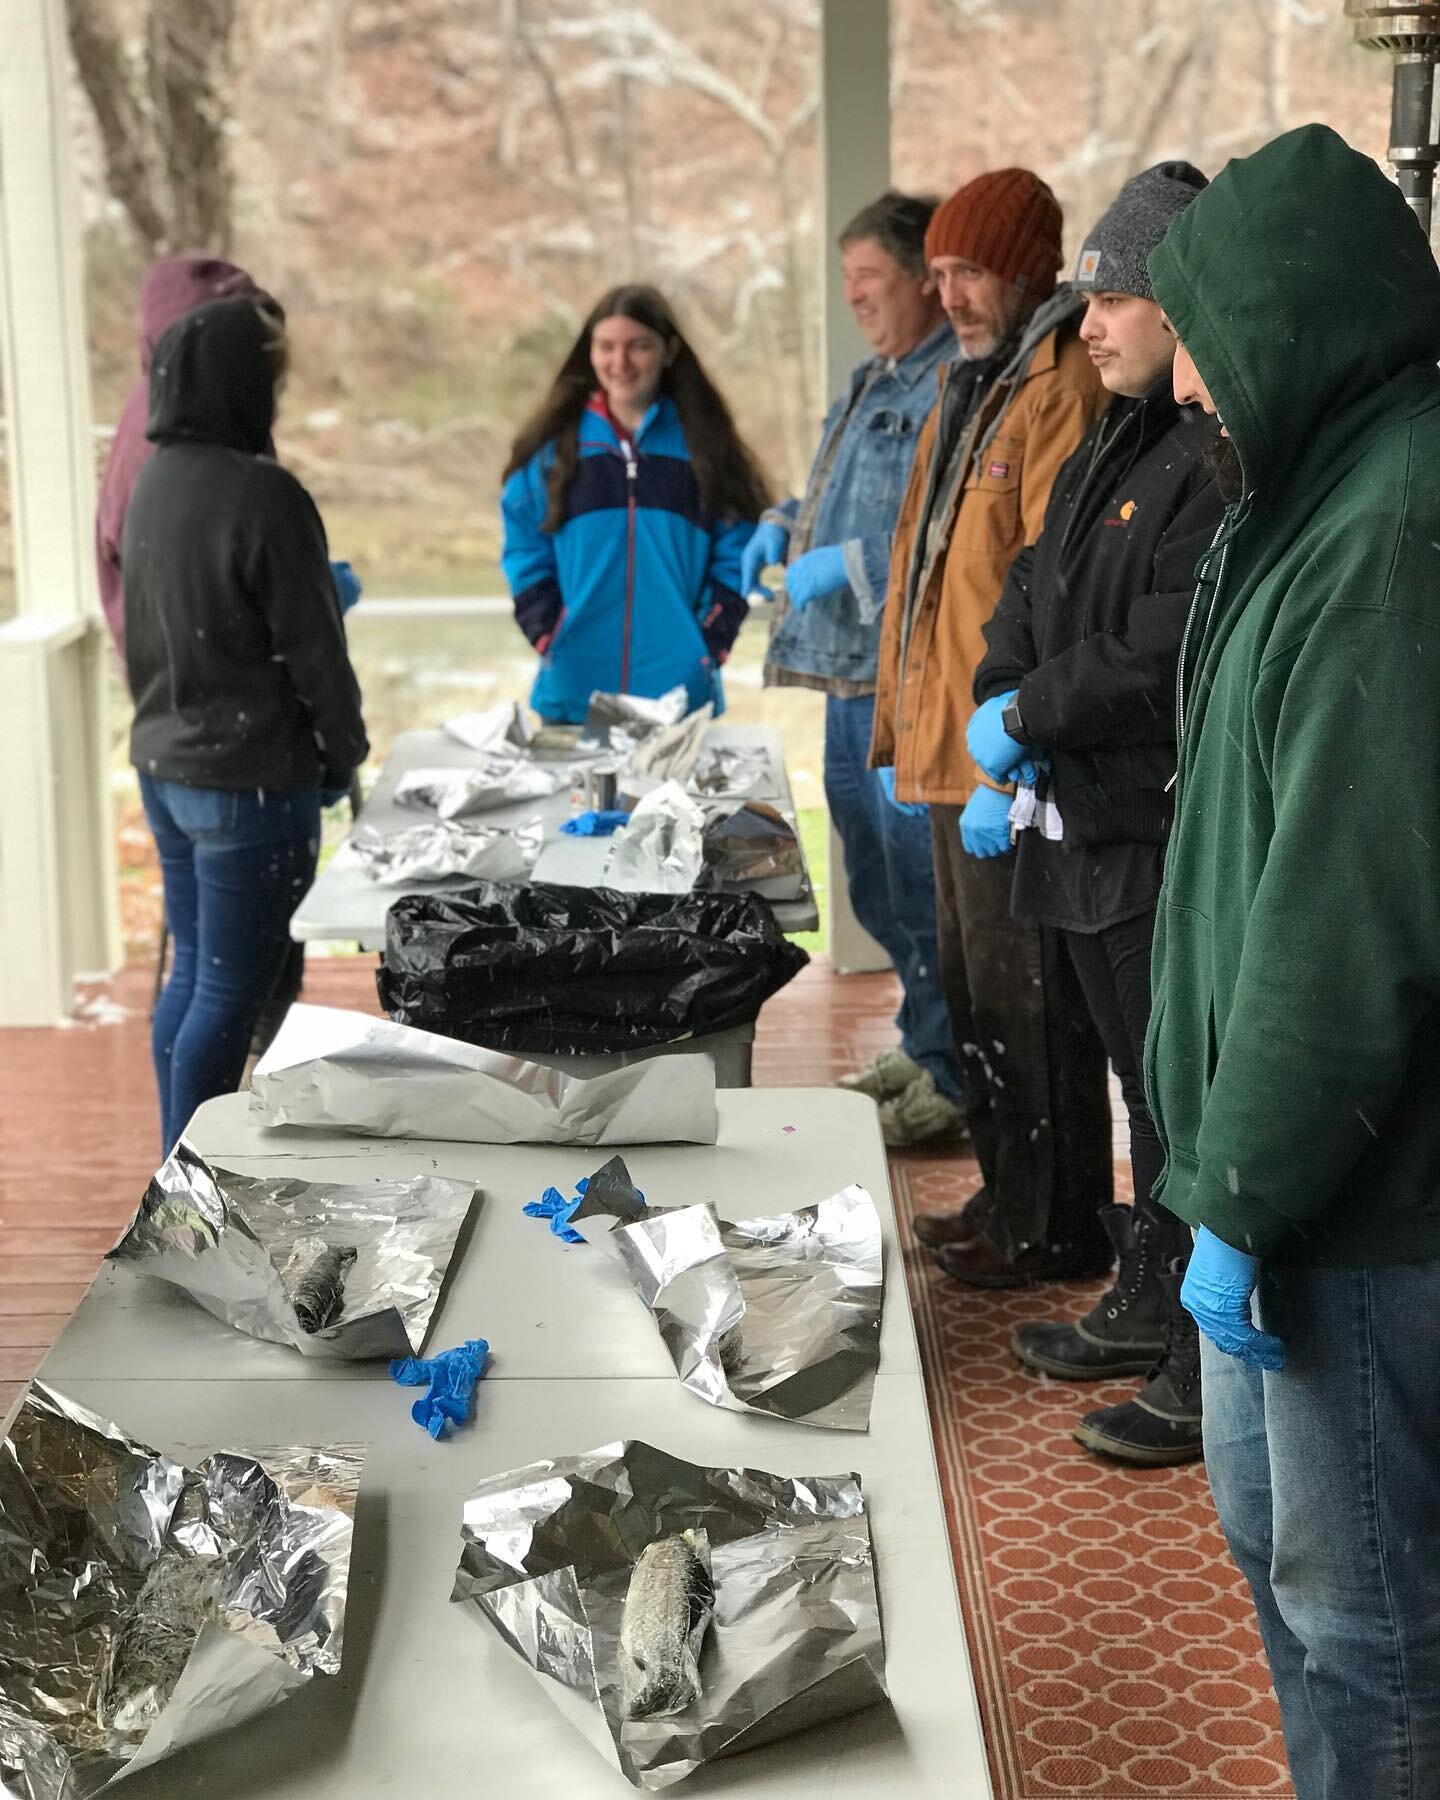 Thanks to all who braved the weather to learn our favorite ways to prepare our state fish, the Brook Trout! 
Also big shout out to @mountainstatetrout for the beautiful Brookies and @highrocks_edcorp for putting these workshops together and choosing 